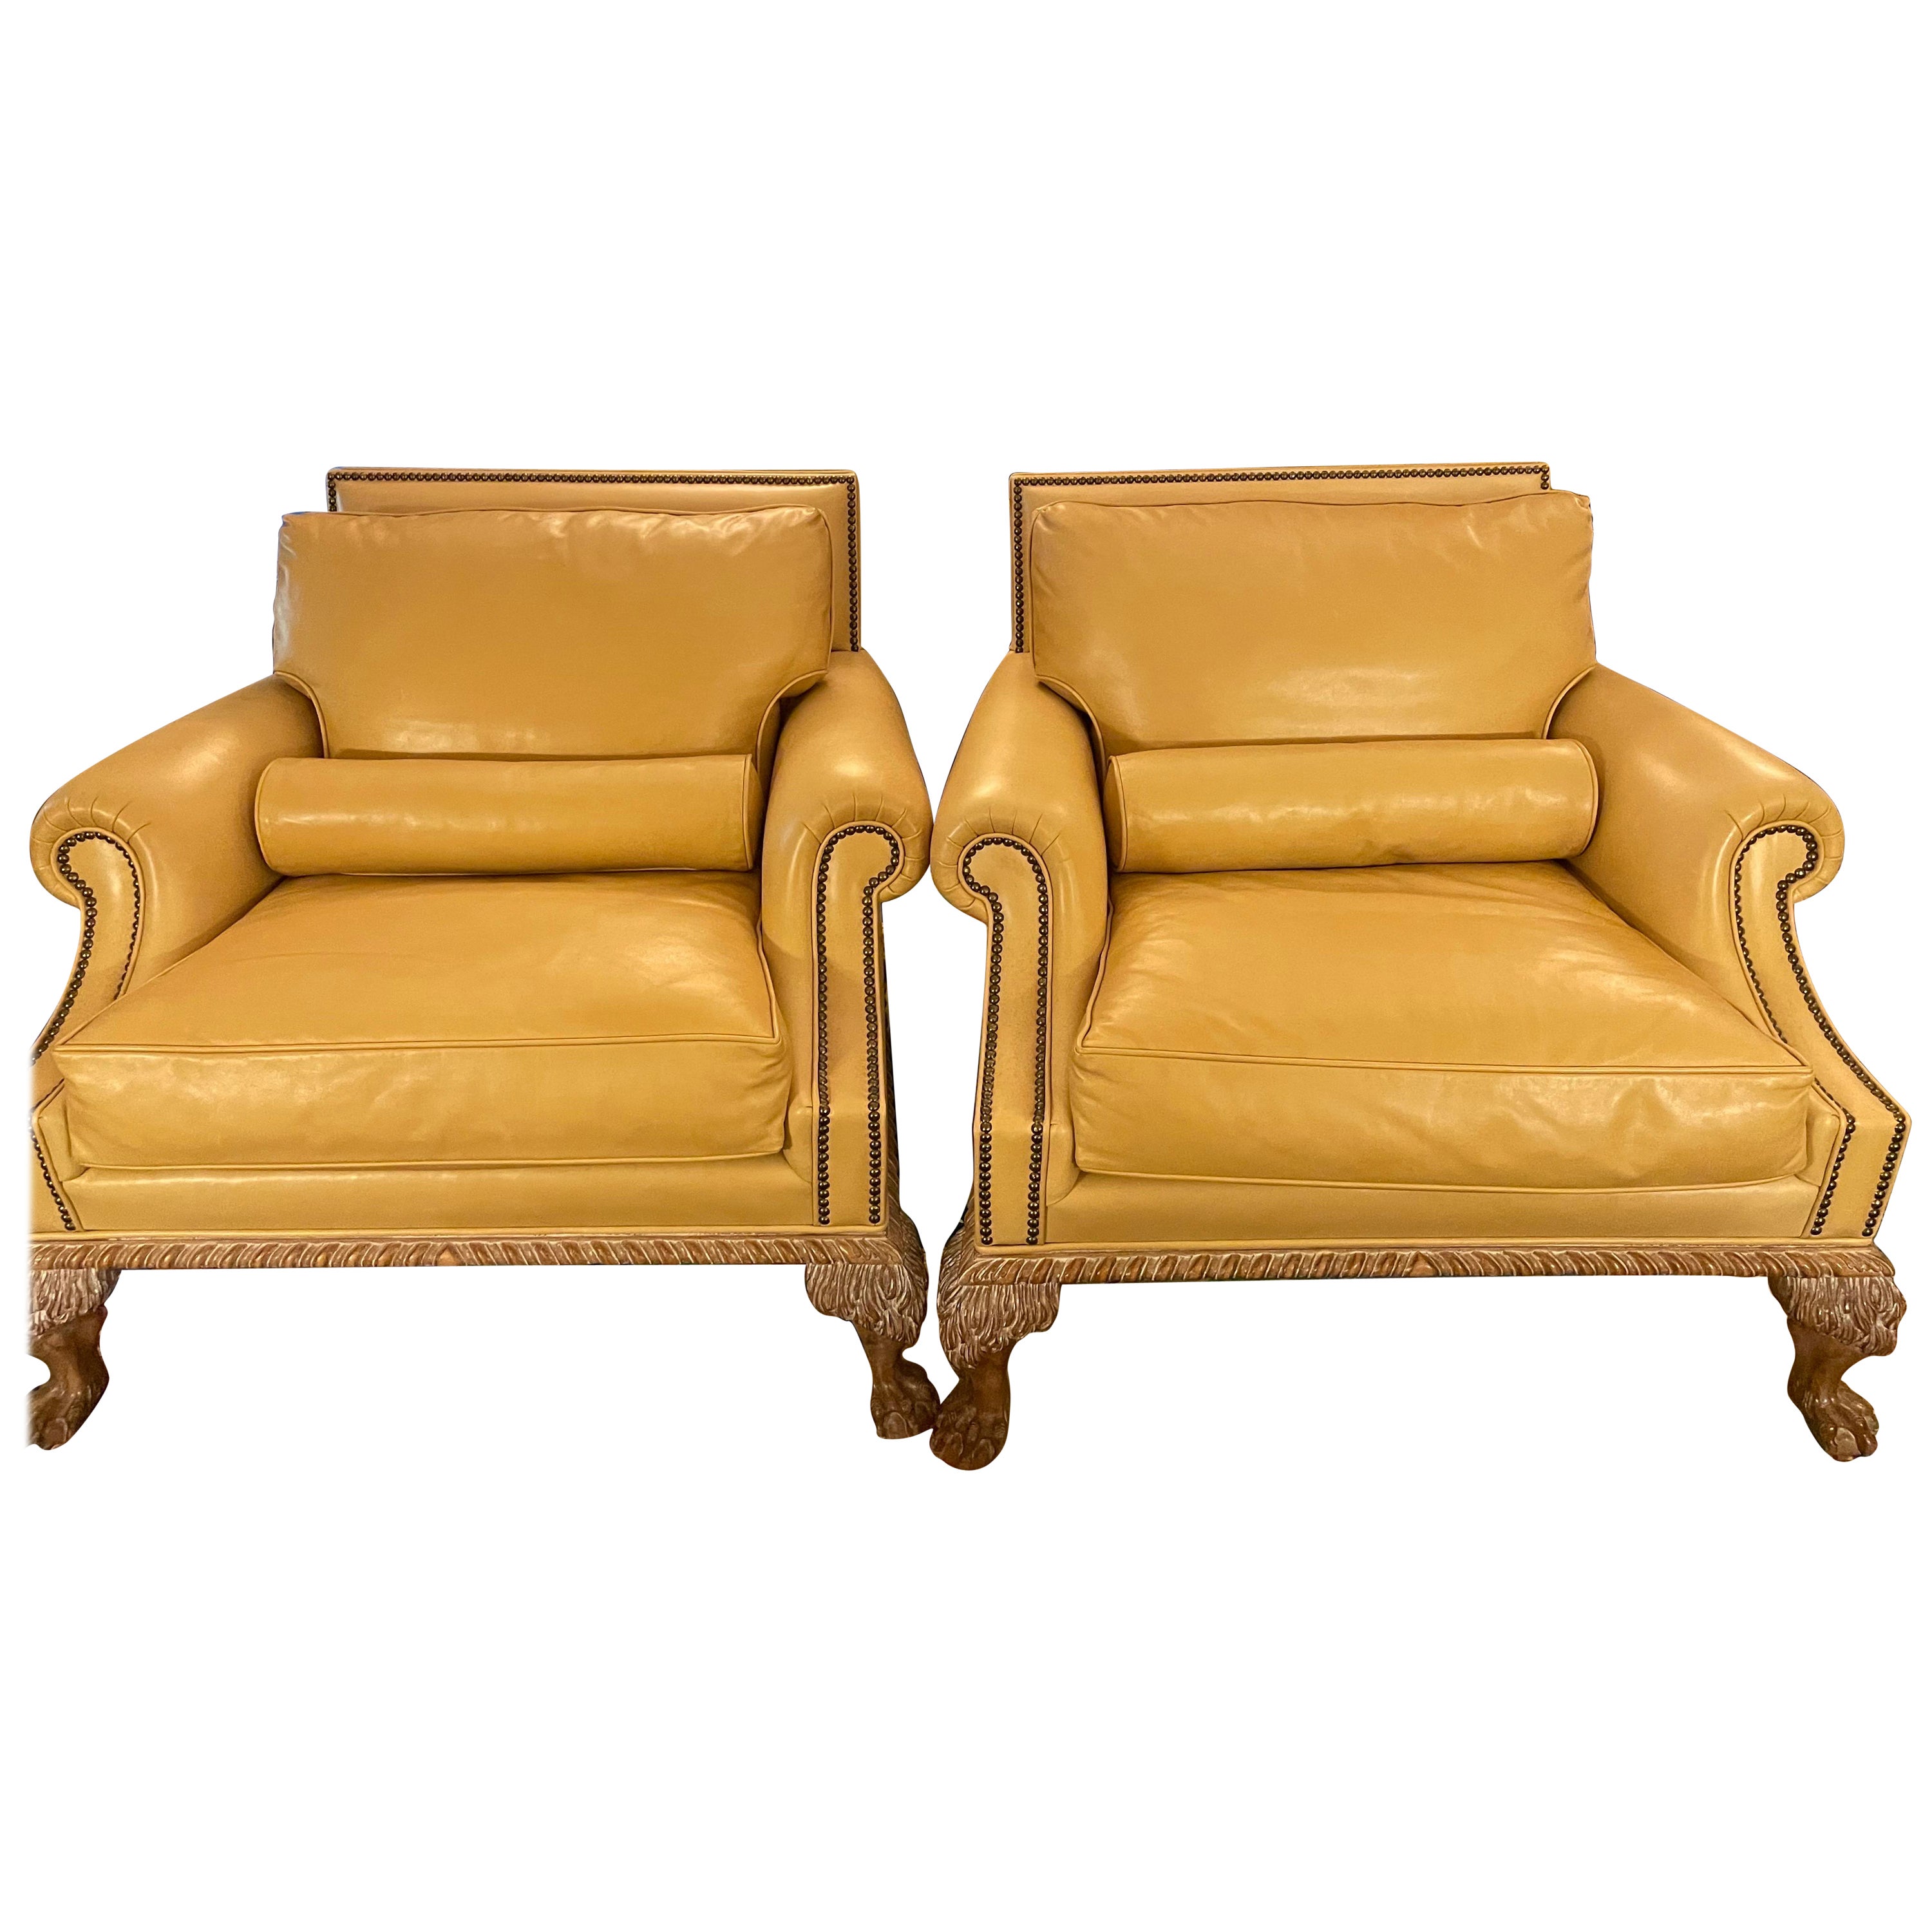 Two Italian Leather Sofas Beige Circa 2000 - Rare - Handmade Set of 2 Armchairs For Sale